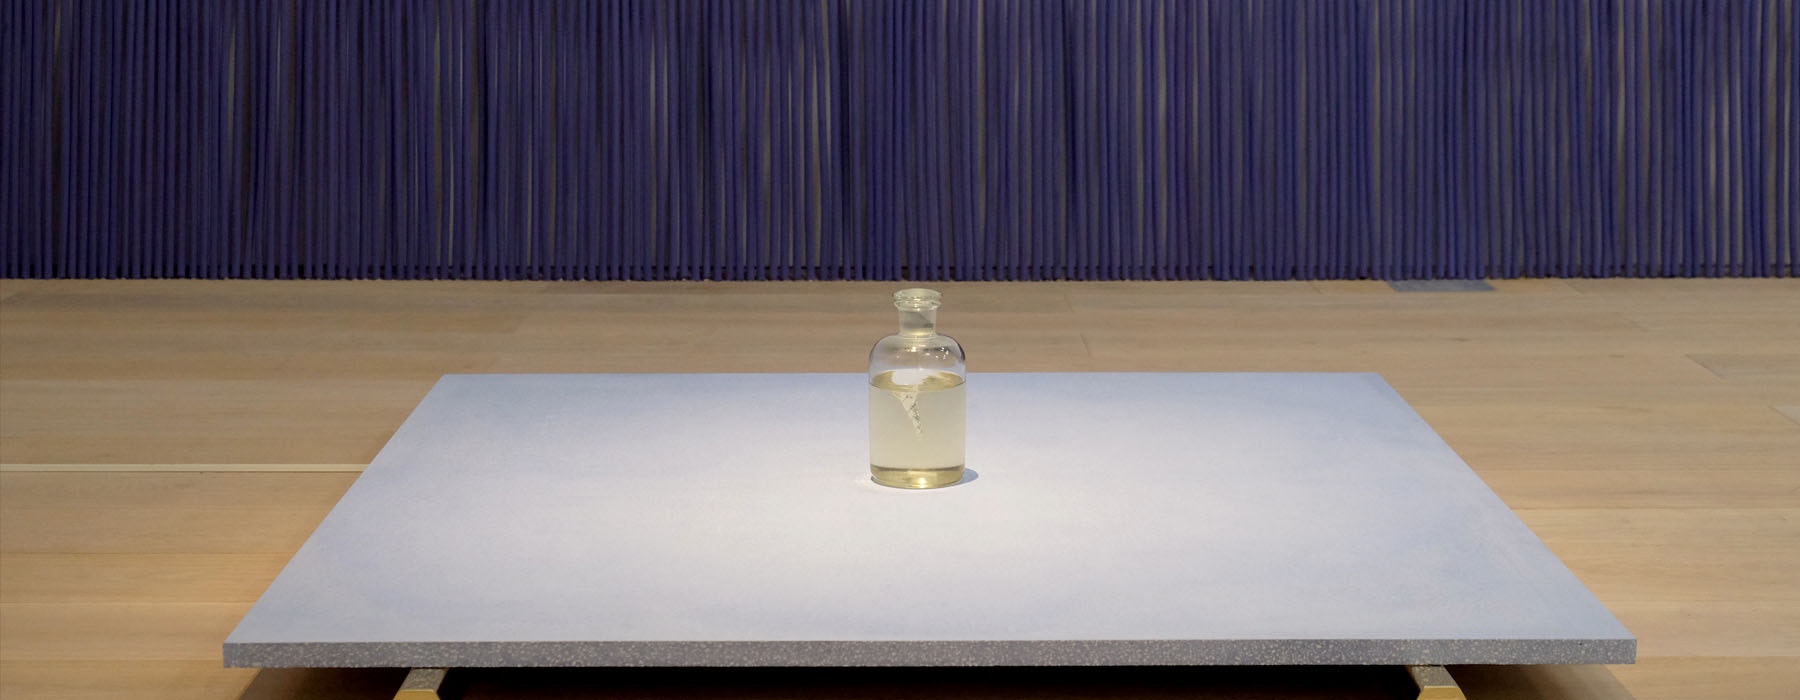 A bottle of water sits on top of a light purple platform. That platform sits on top of two gold-coloured hexagonal legs. Behind, leaning against the wall is a row of over-sized incense sticks, also purple